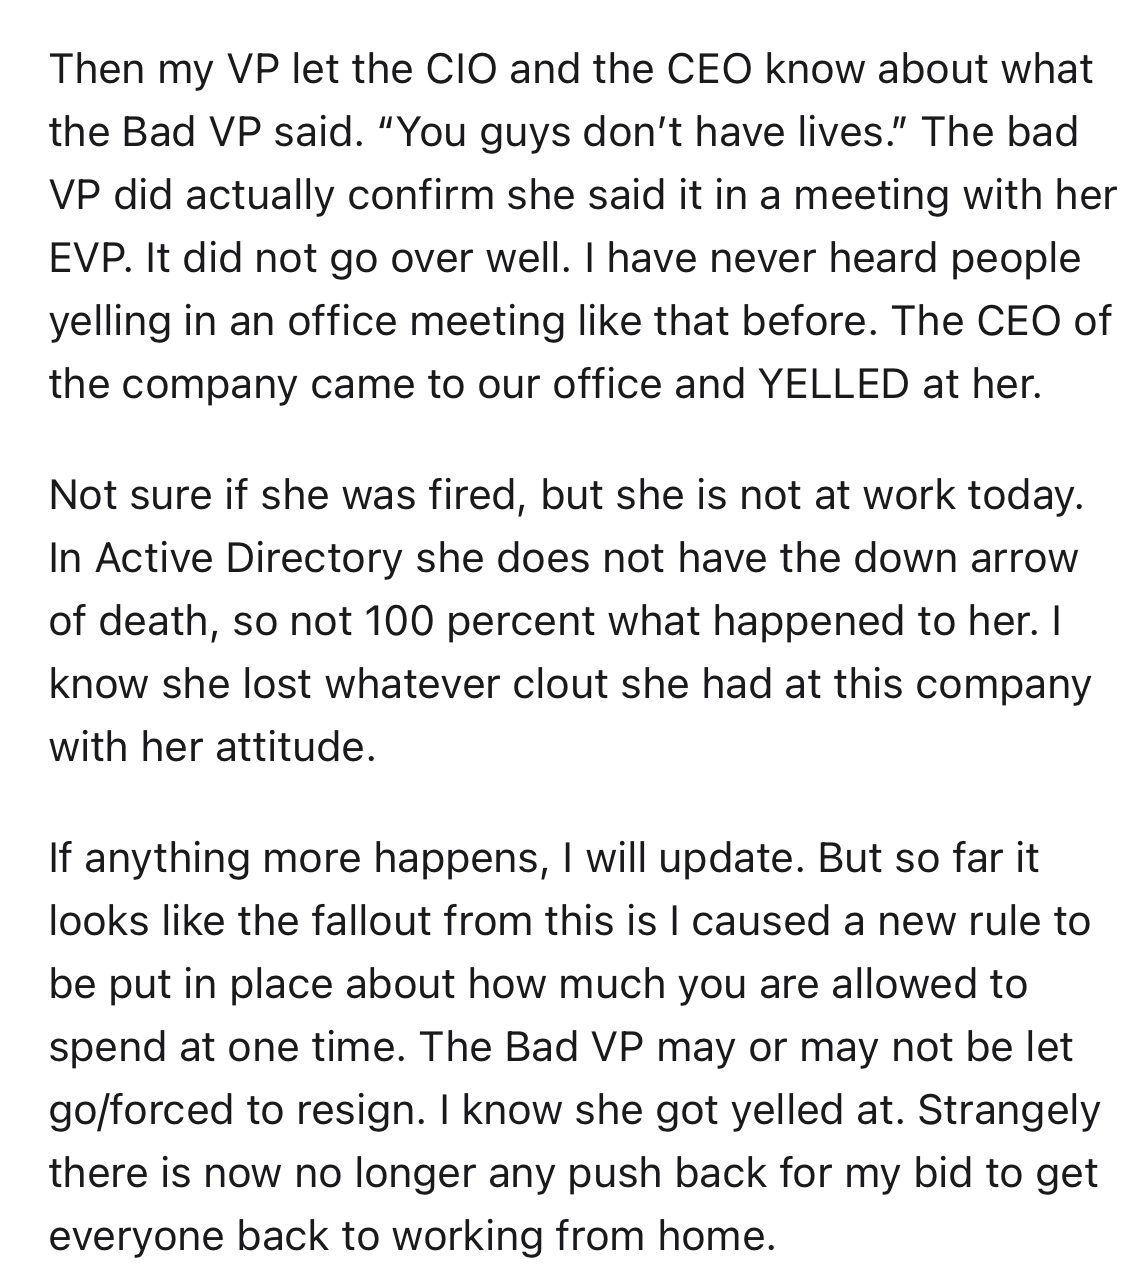 employees throw $6k 4th of July party at work -angle - Then my Vp let the Cio and the Ceo know about what the Bad Vp said. "You guys don't have lives." The bad Vp did actually confirm she said it in a meeting with her Evp. It did not go over well. I have 